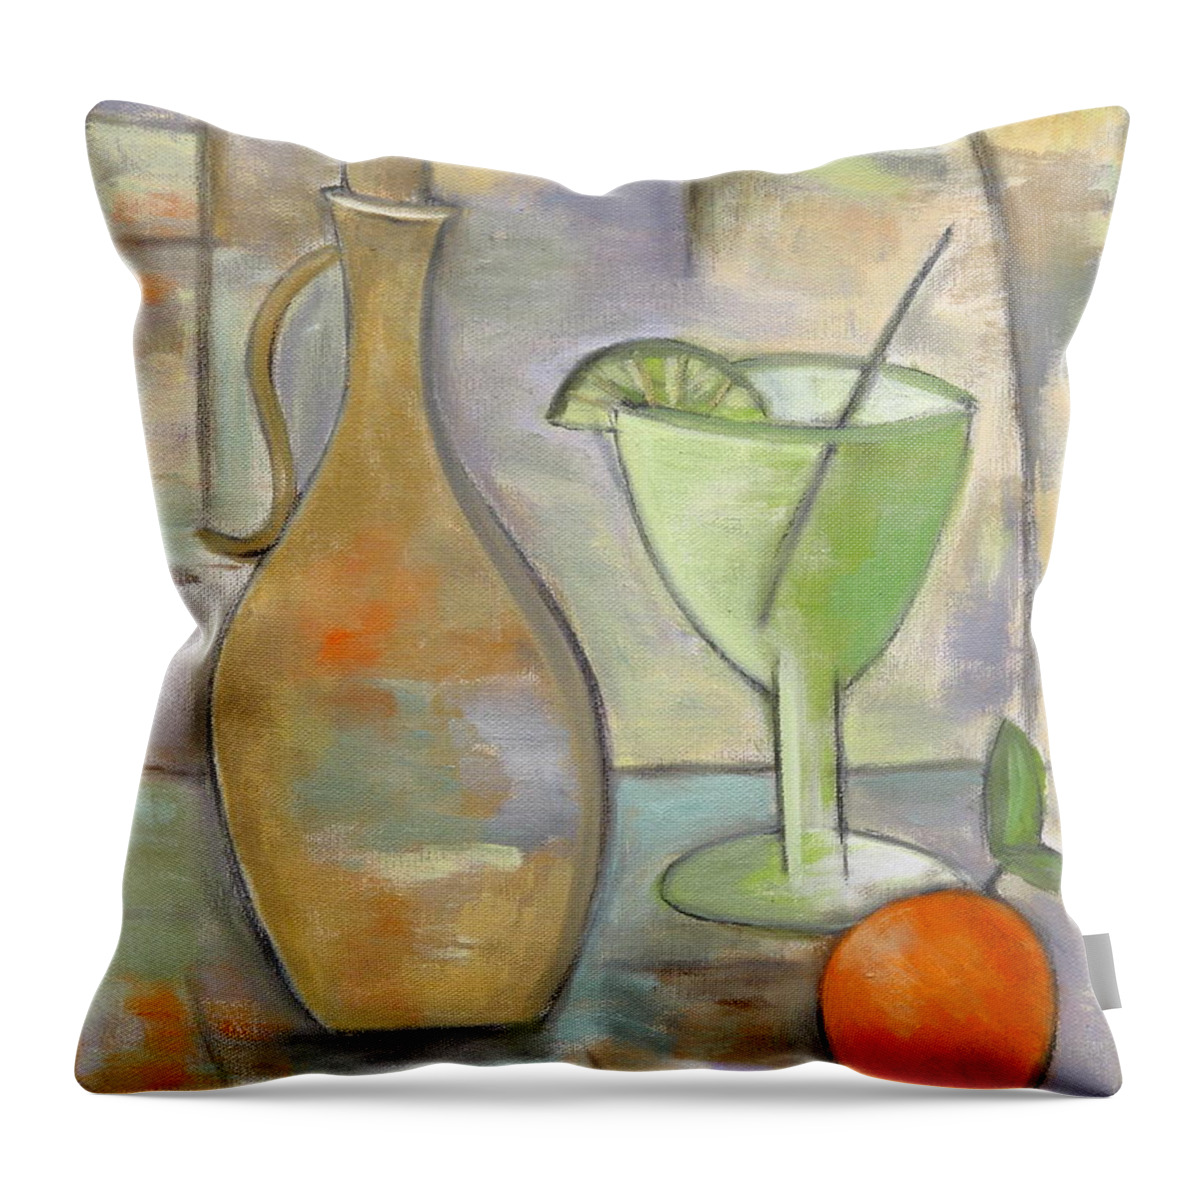 Still Life Throw Pillow featuring the painting Con Limon by Trish Toro